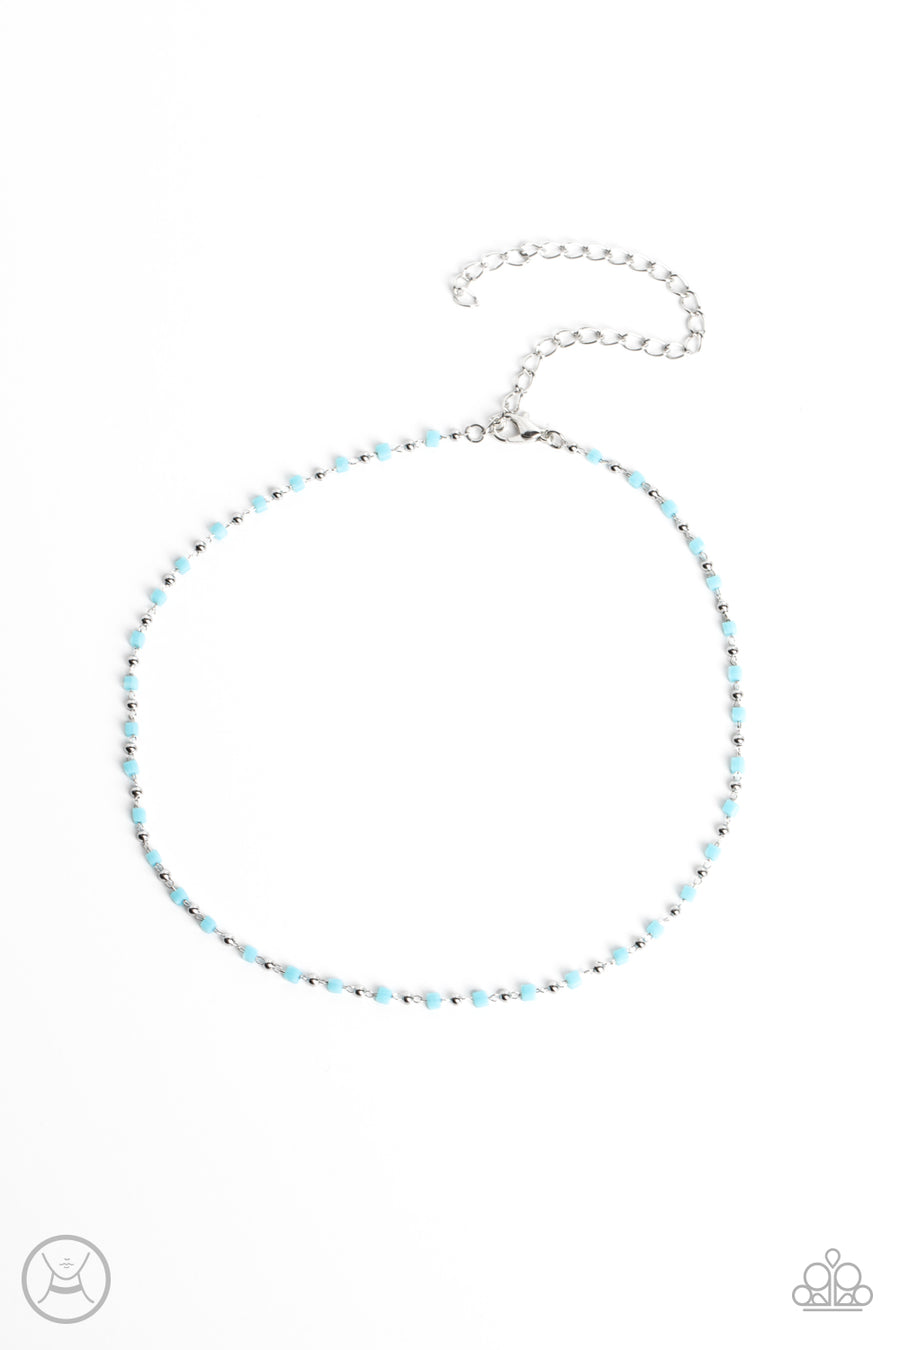 Neon Lights - Blue Necklace - Paparazzi Accessories - Dainty silver beads and square Waterspout beads delicately link around the neck, creating a minimalist inspired bright pop of color. Features an adjustable clasp closure.